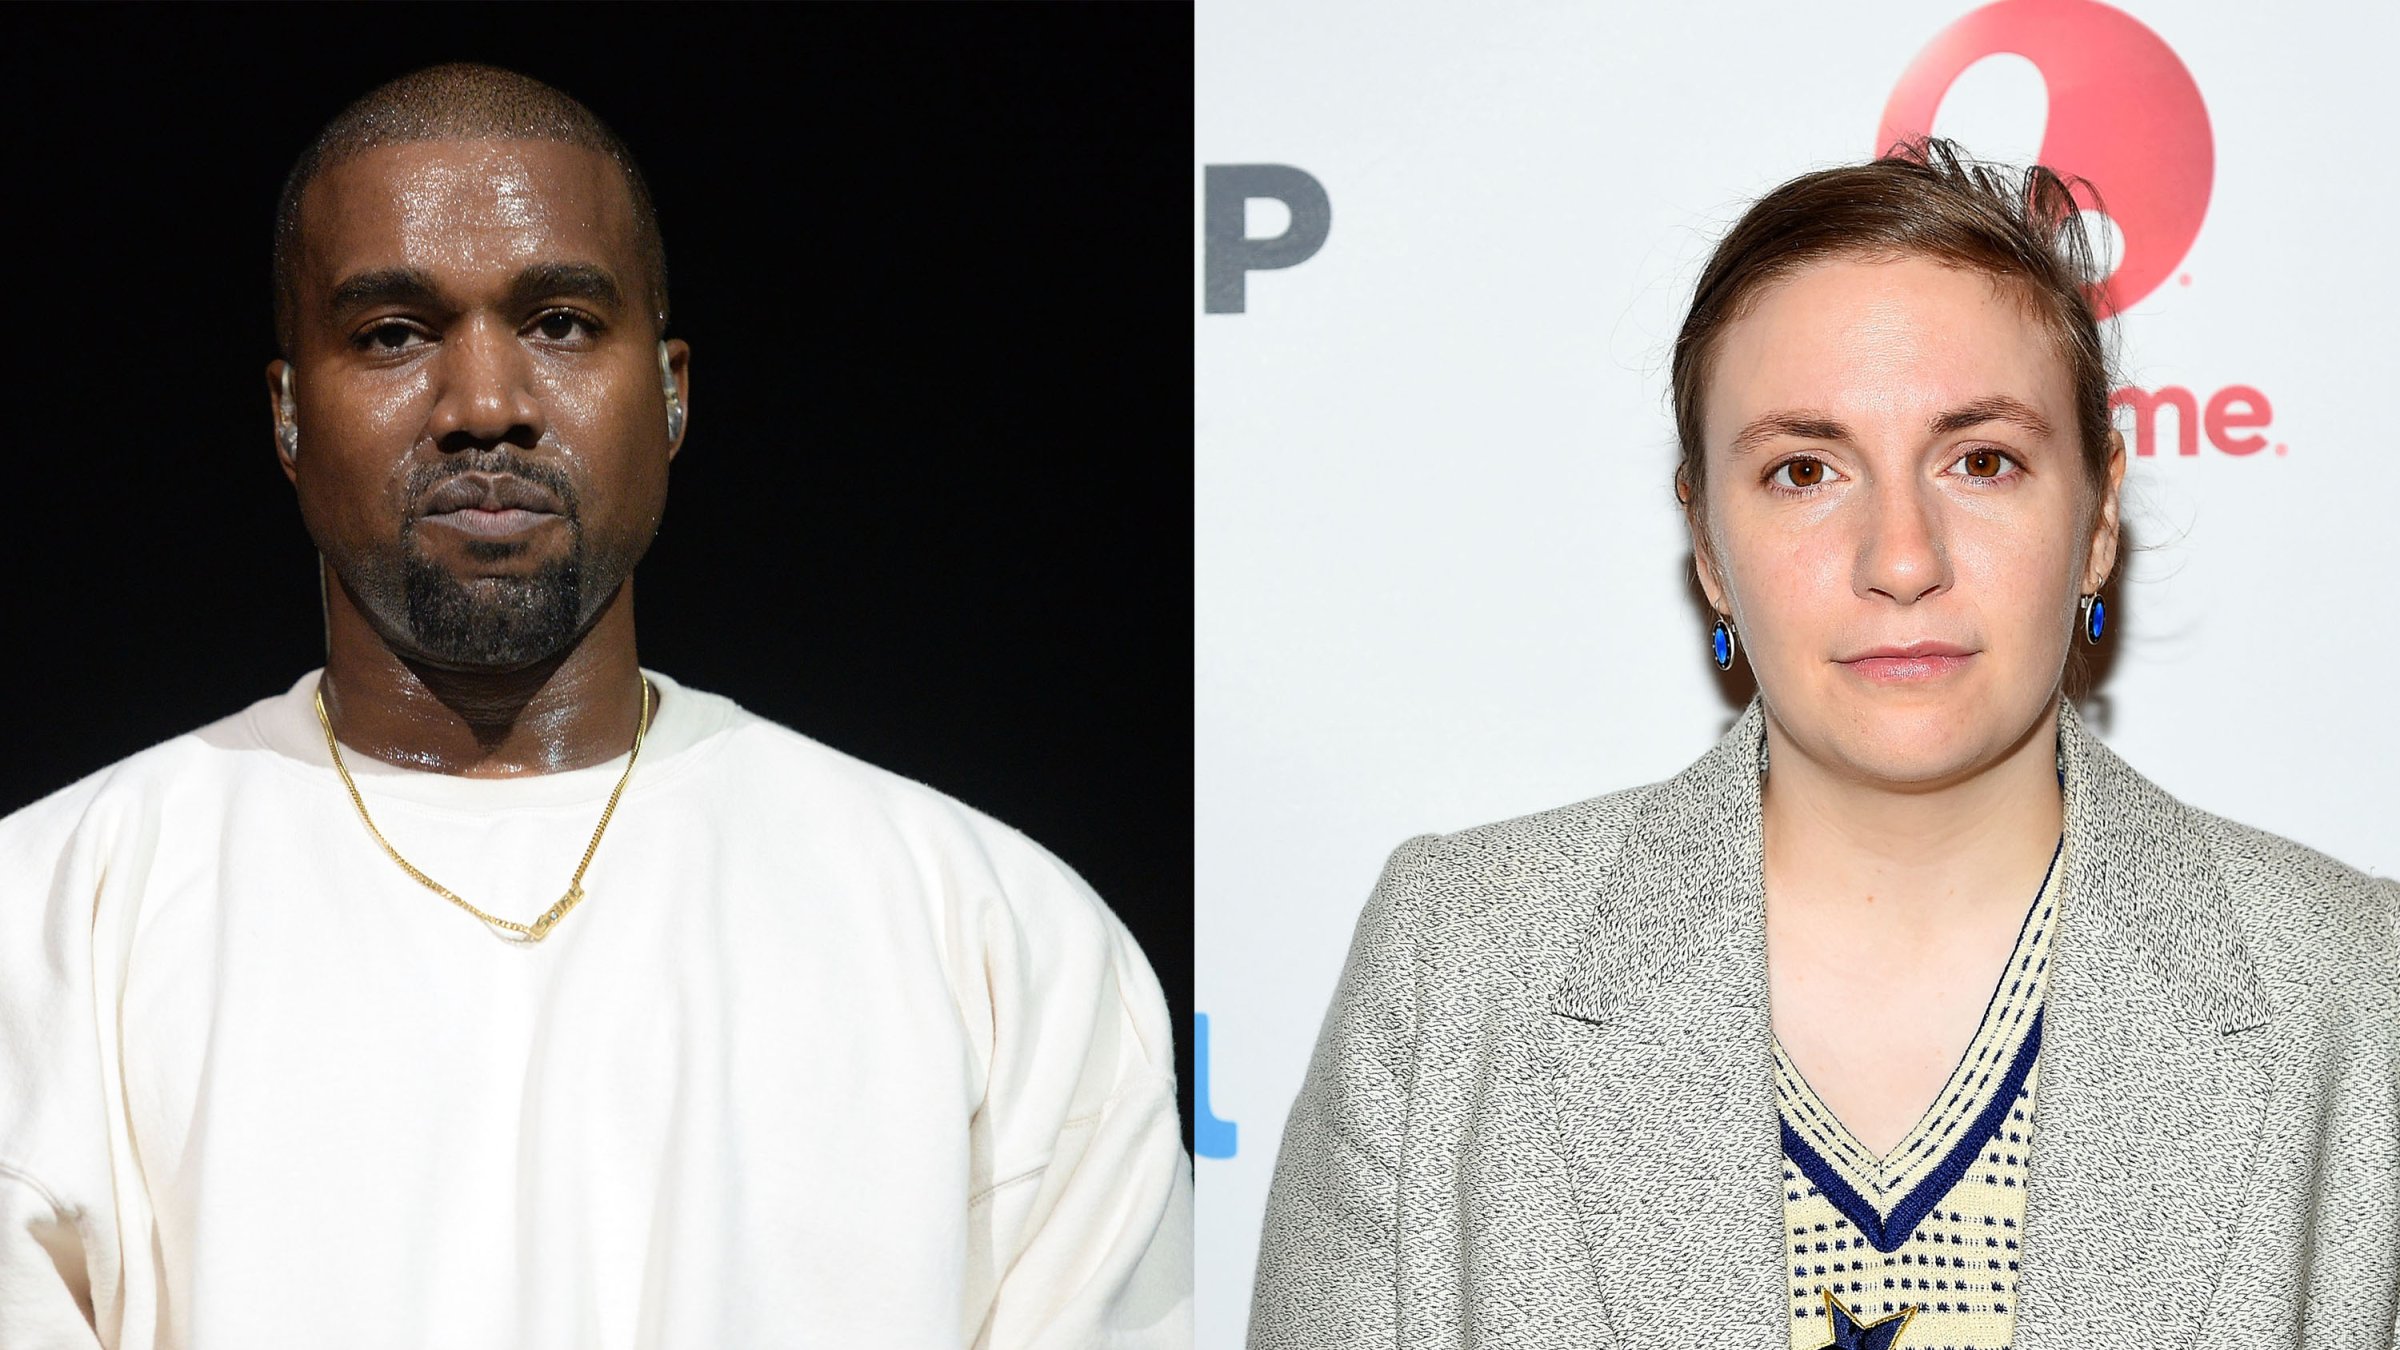 Lena Dunham commented on Kanye West's Famous music video